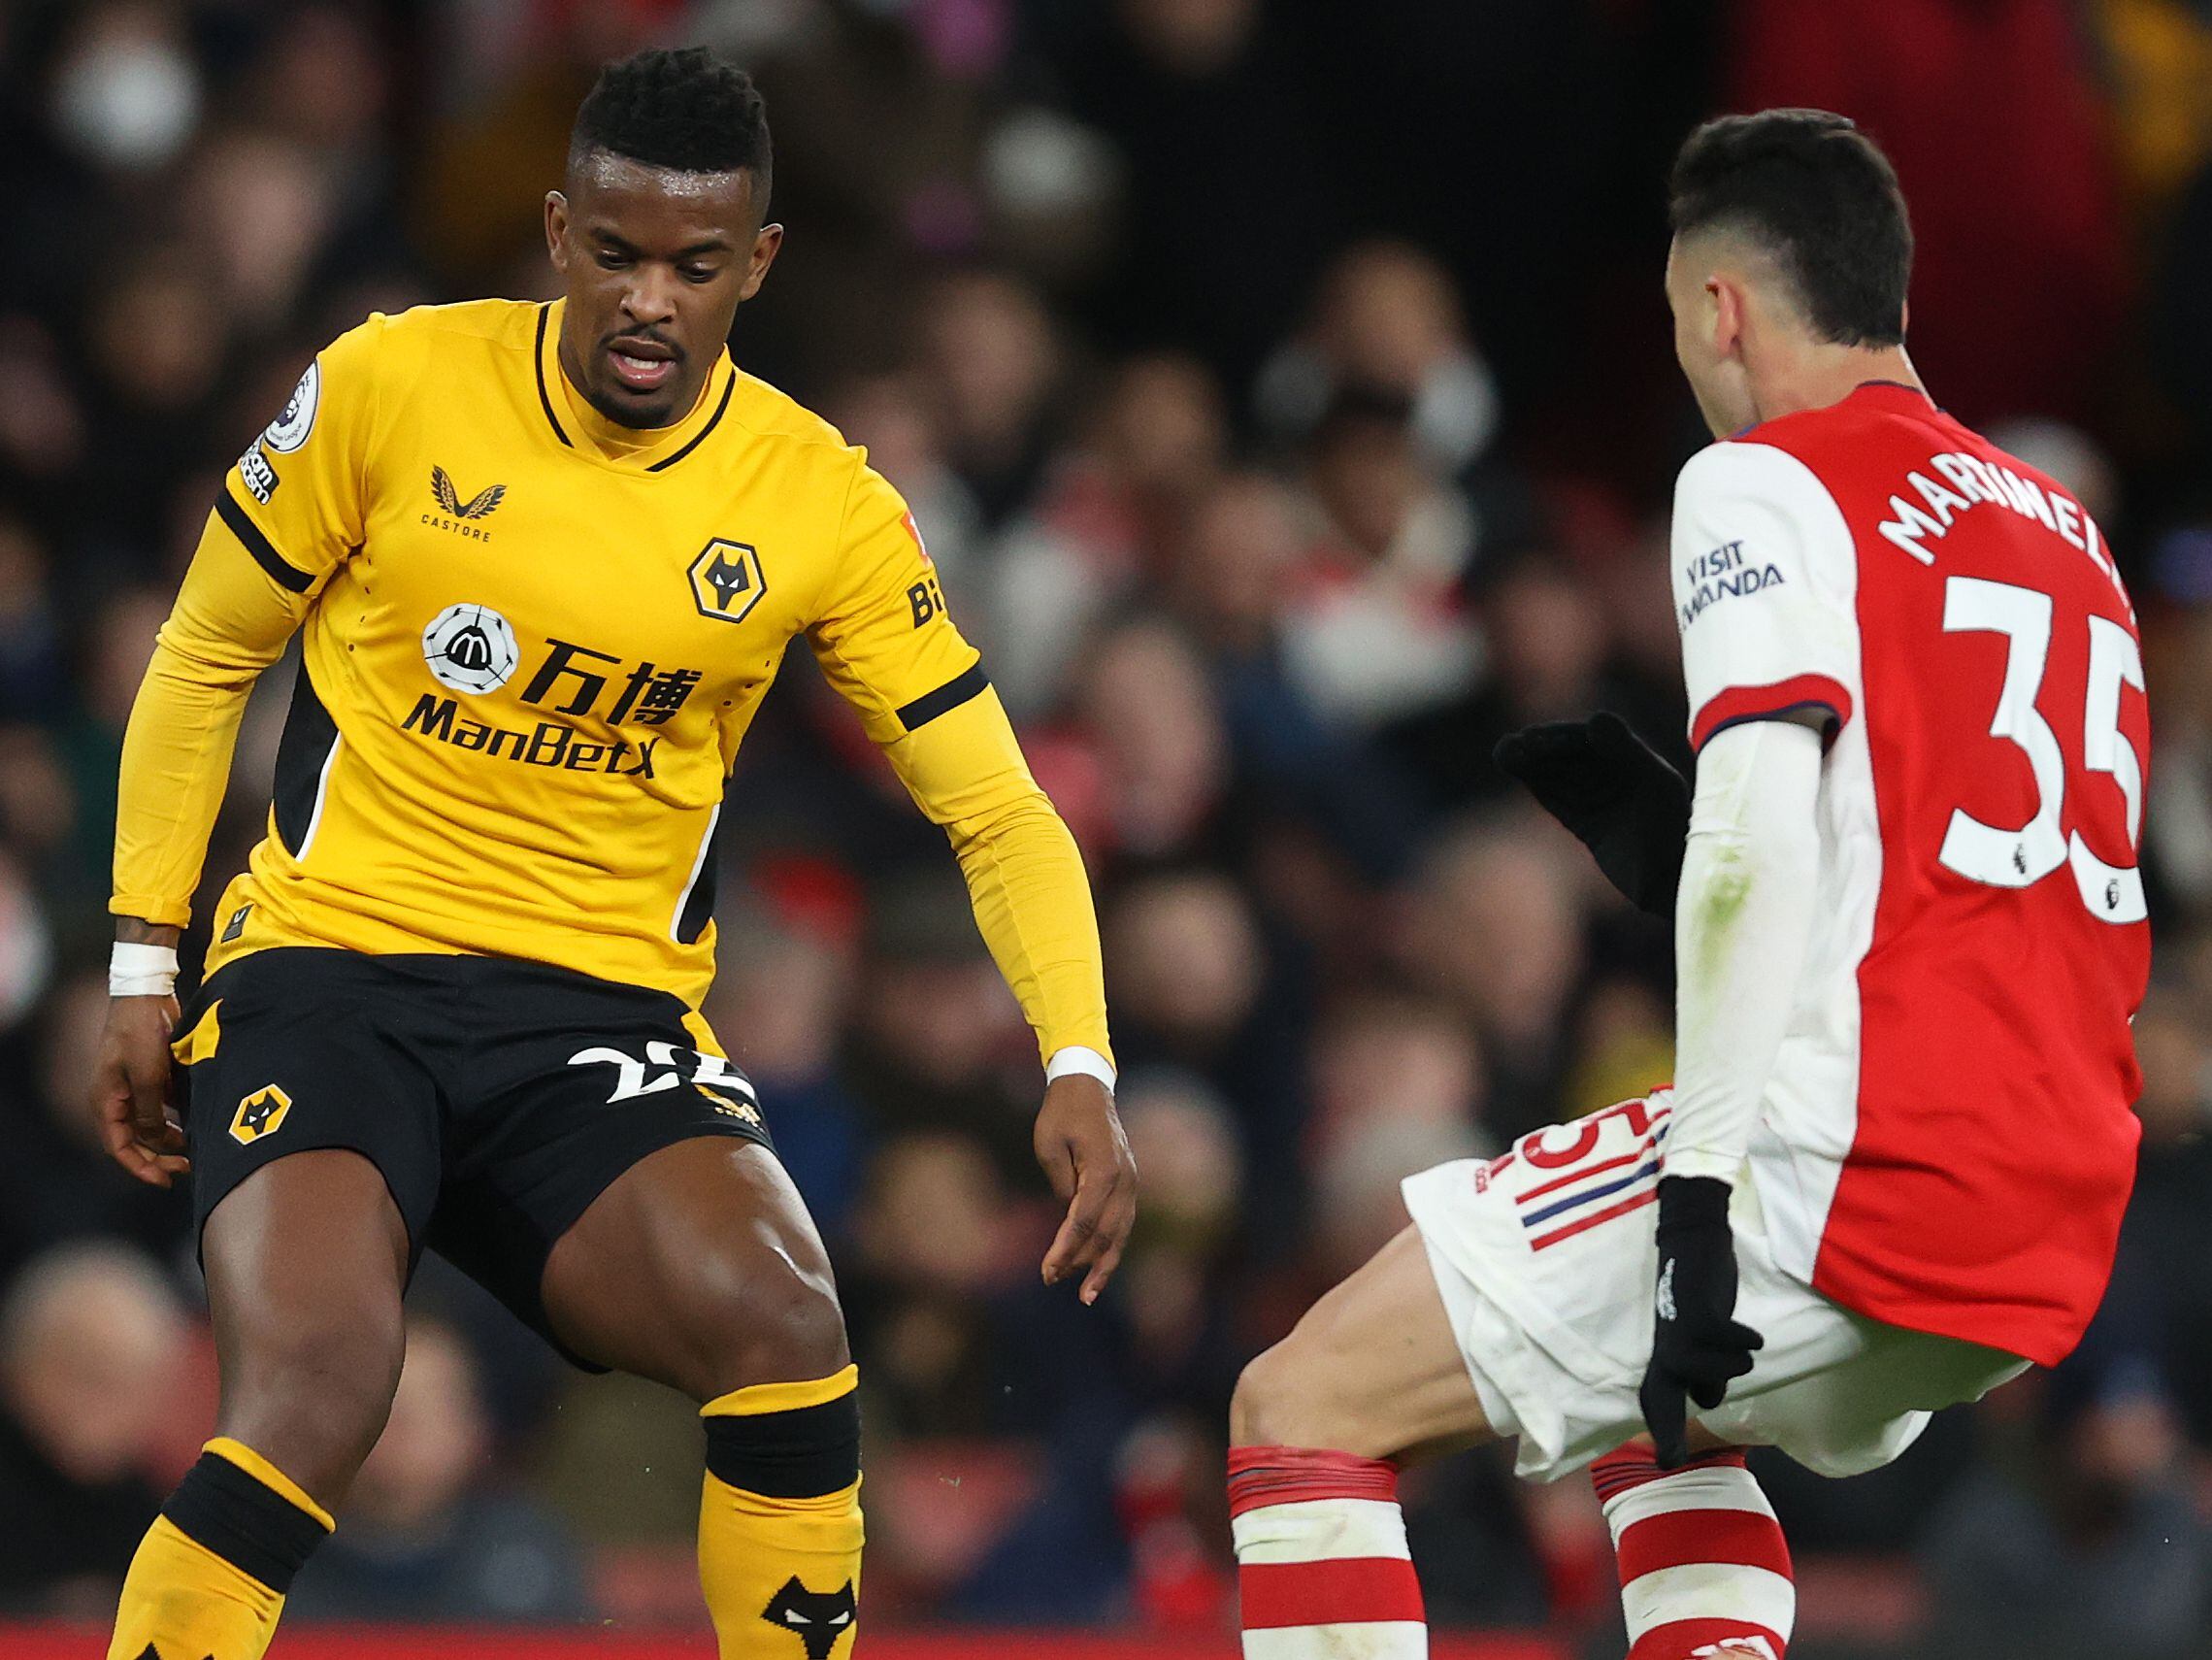 Exclusive: Nelson Semedo is focussing on his Wolves future despite lack of contract talks